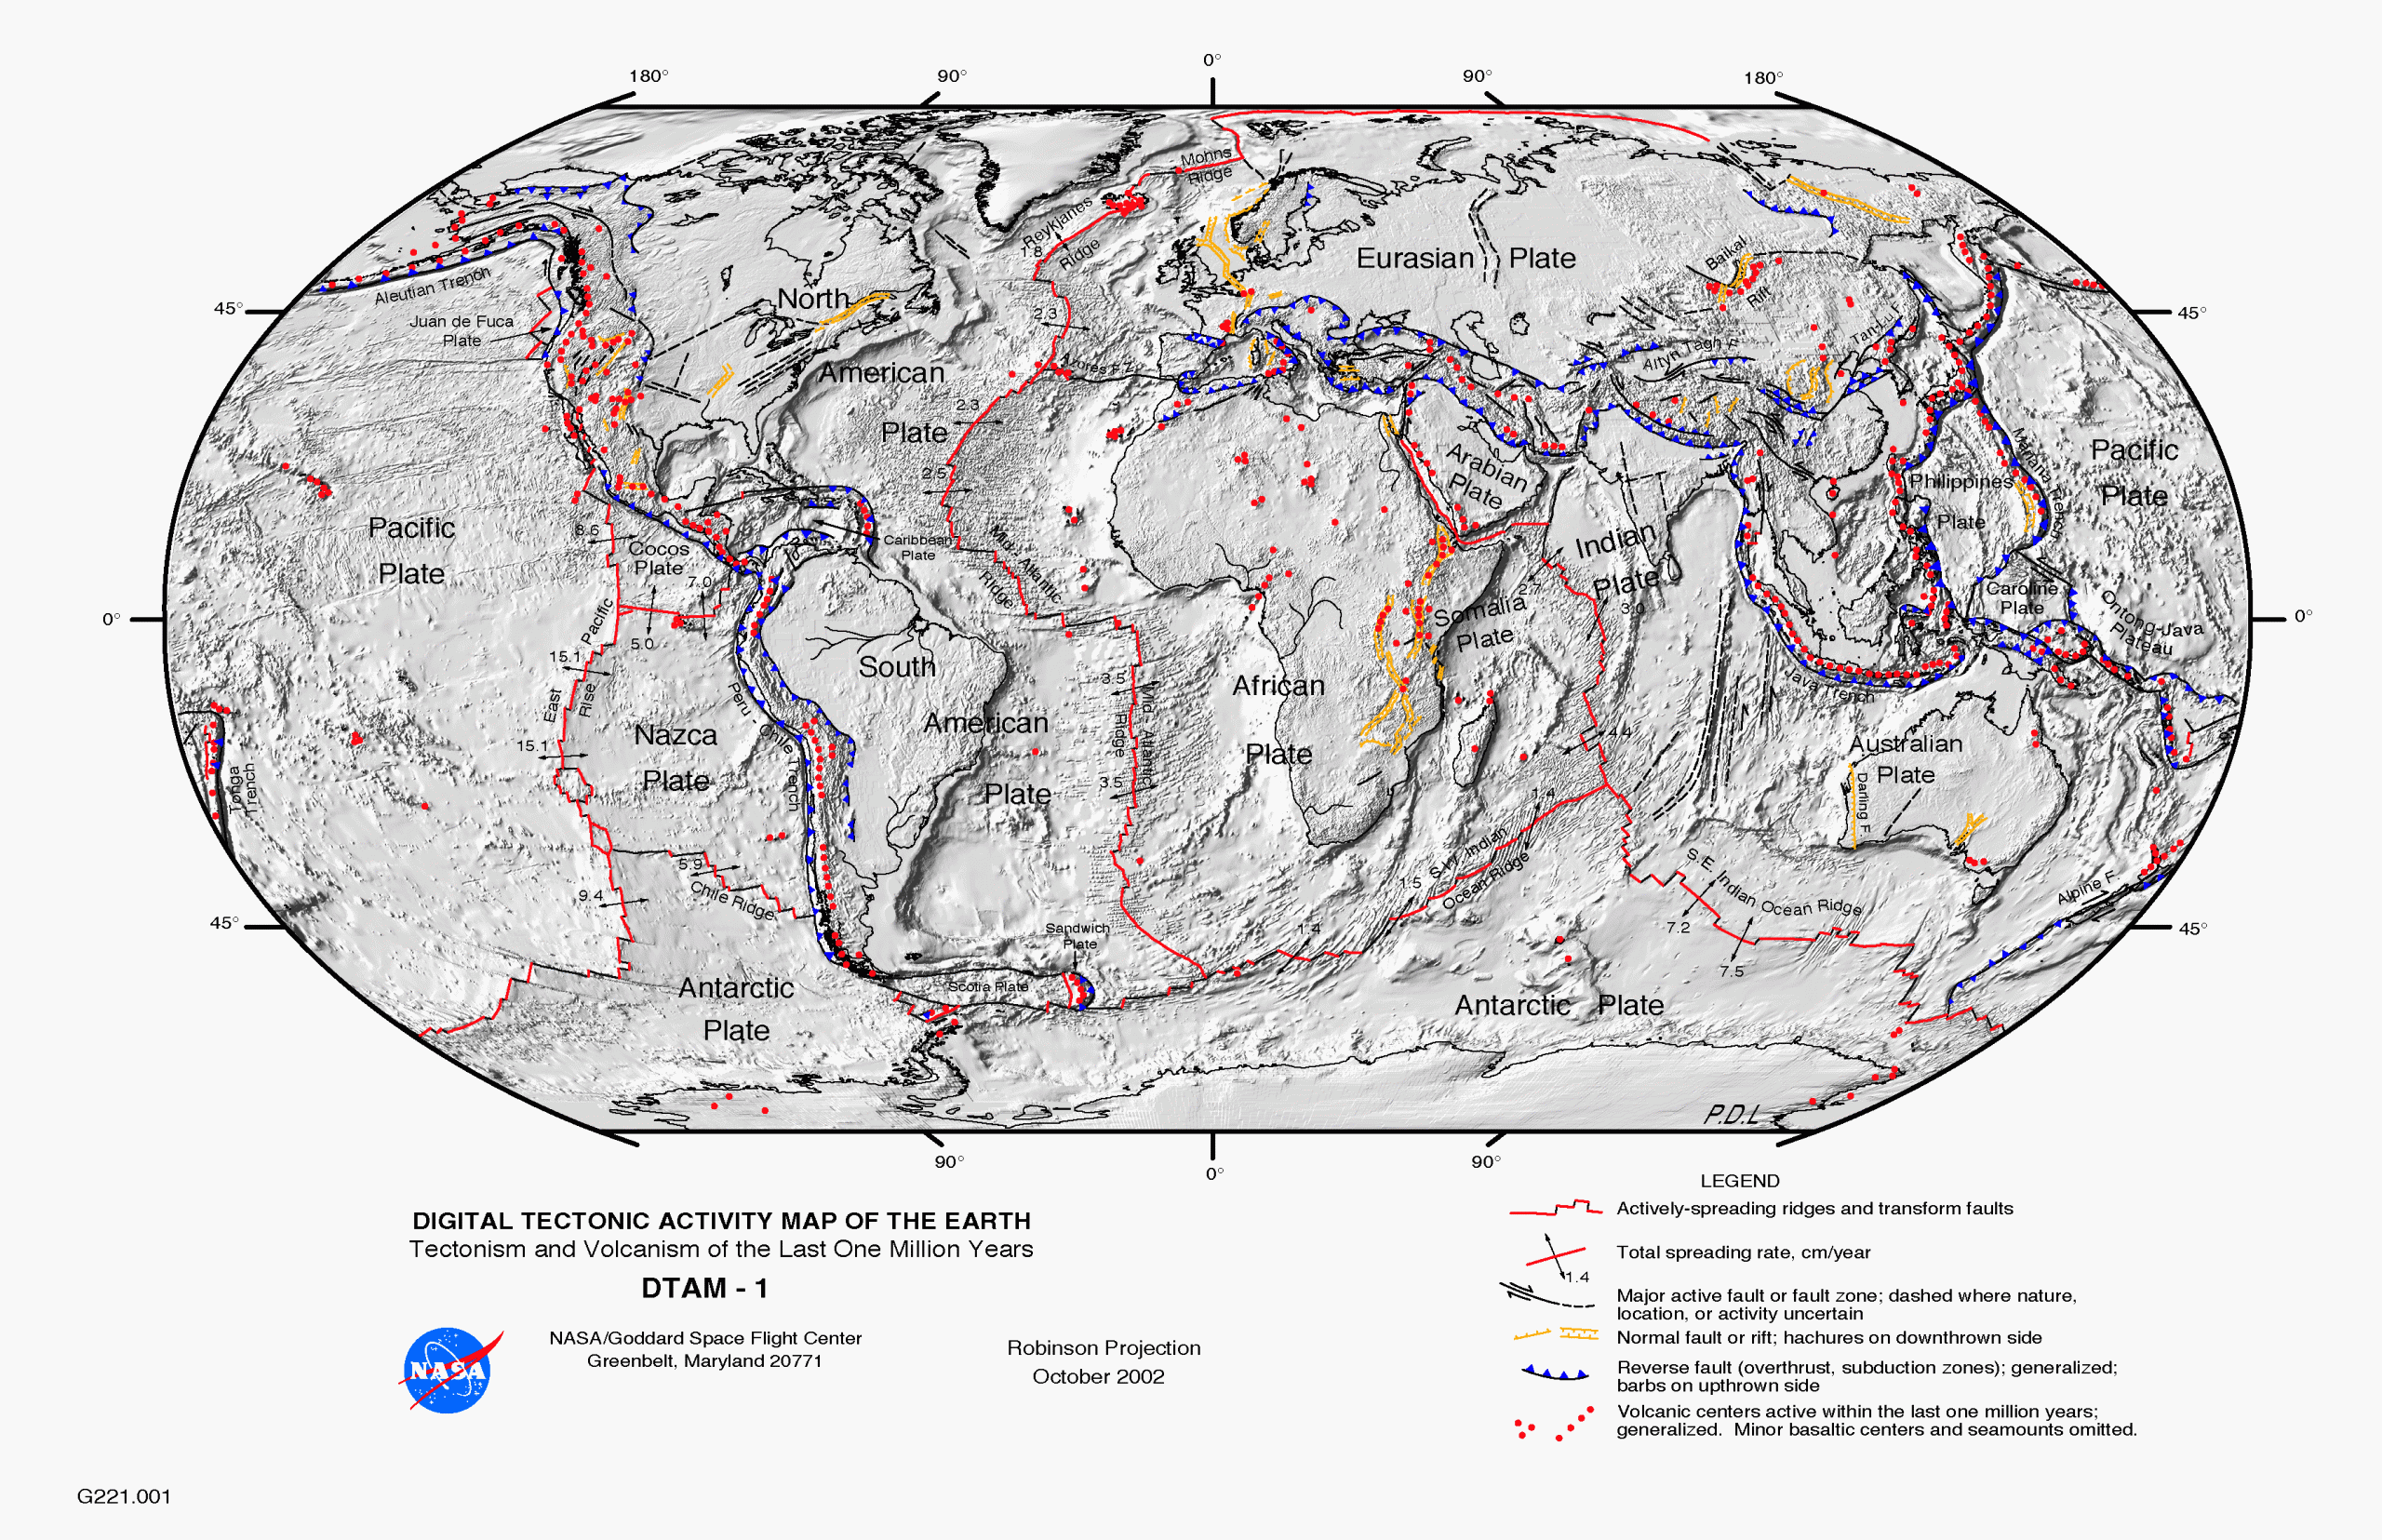 Figure 4.18 A detailed map of Earth's tectonic plates. [Source: NASA, http://bit.ly/1PZHRMZ]